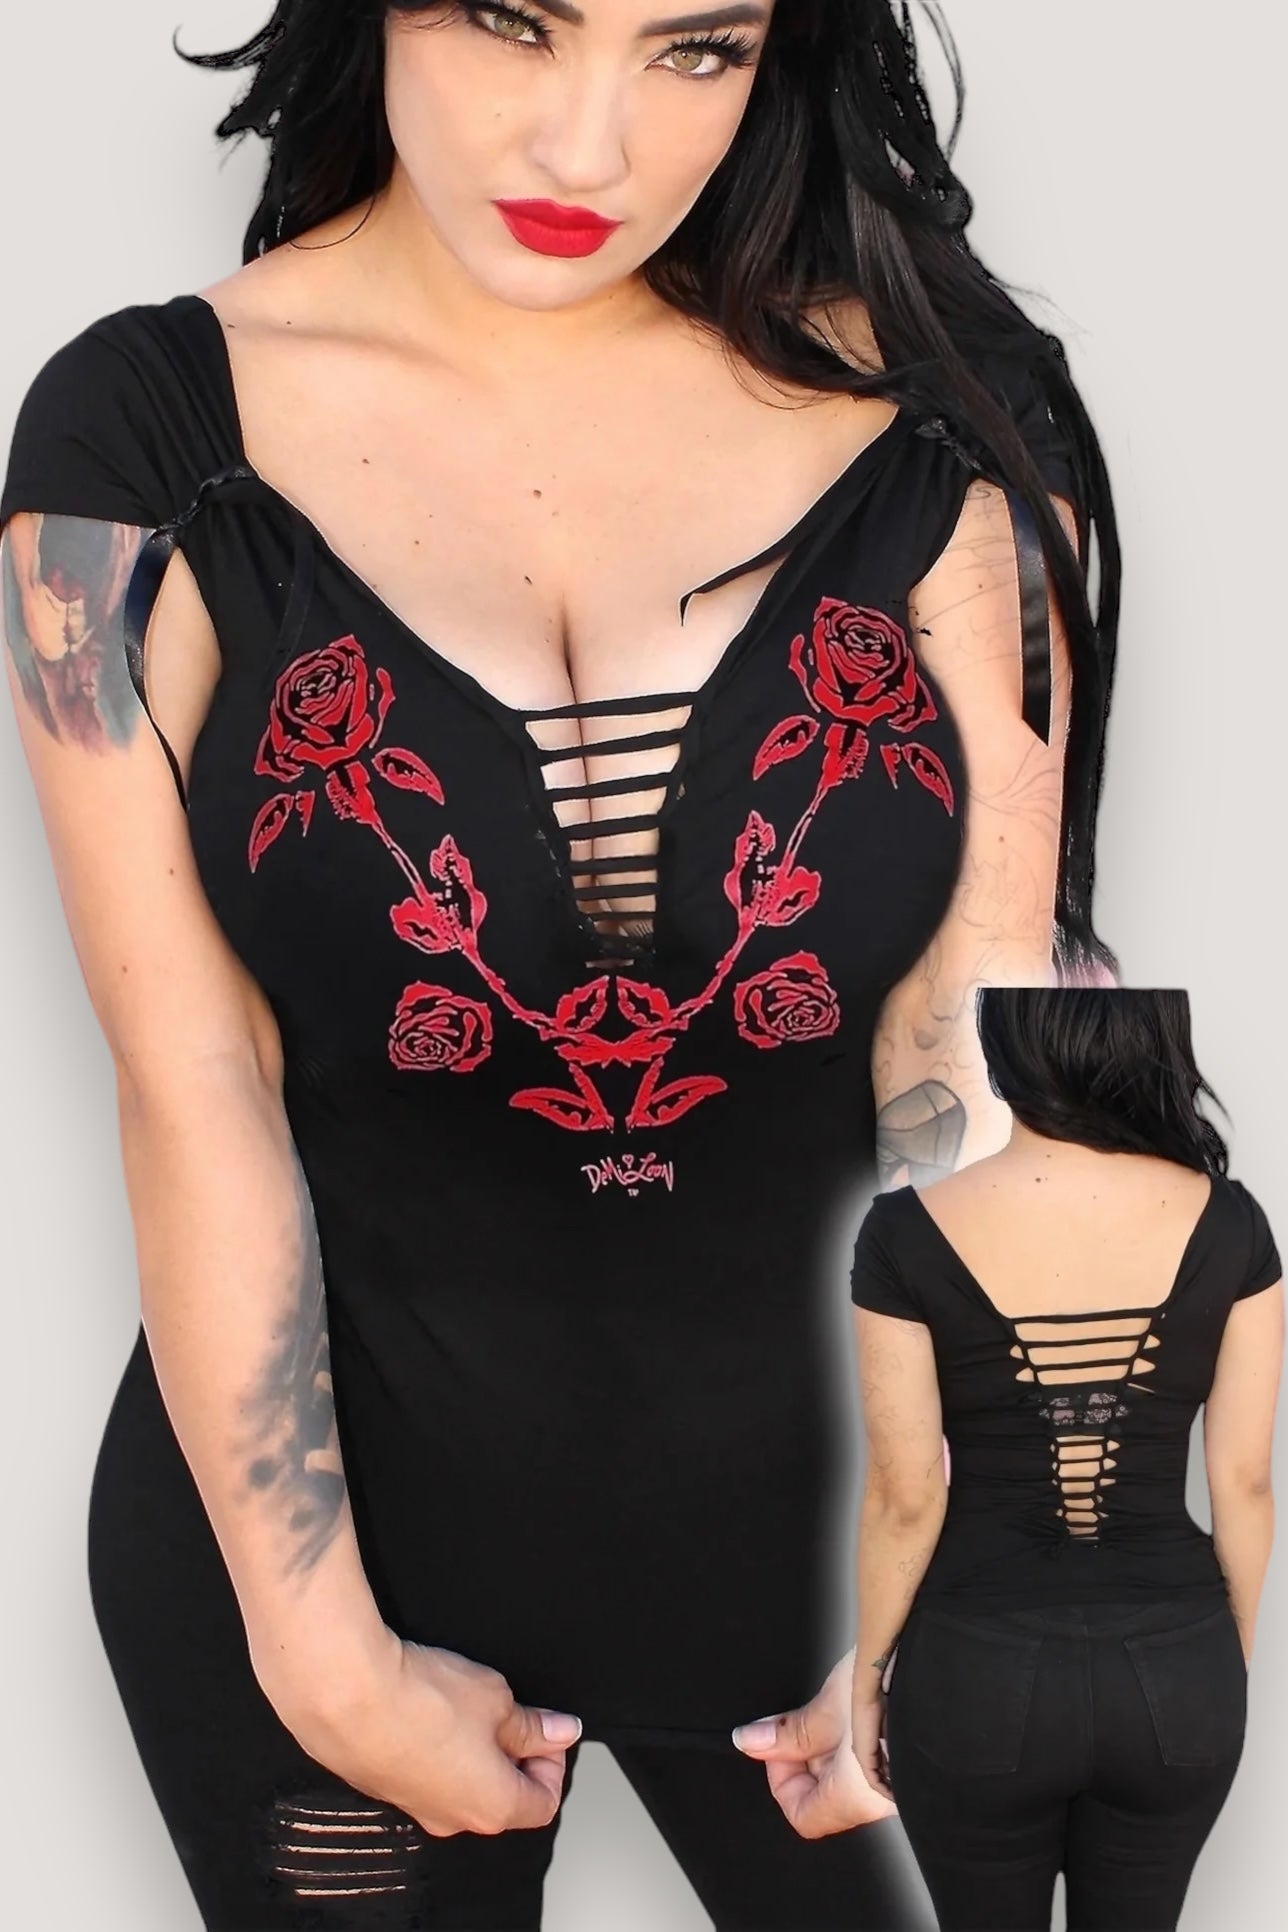 Gothic Rose Slashed Festival Goth Cowgirl Cut-Out Tee